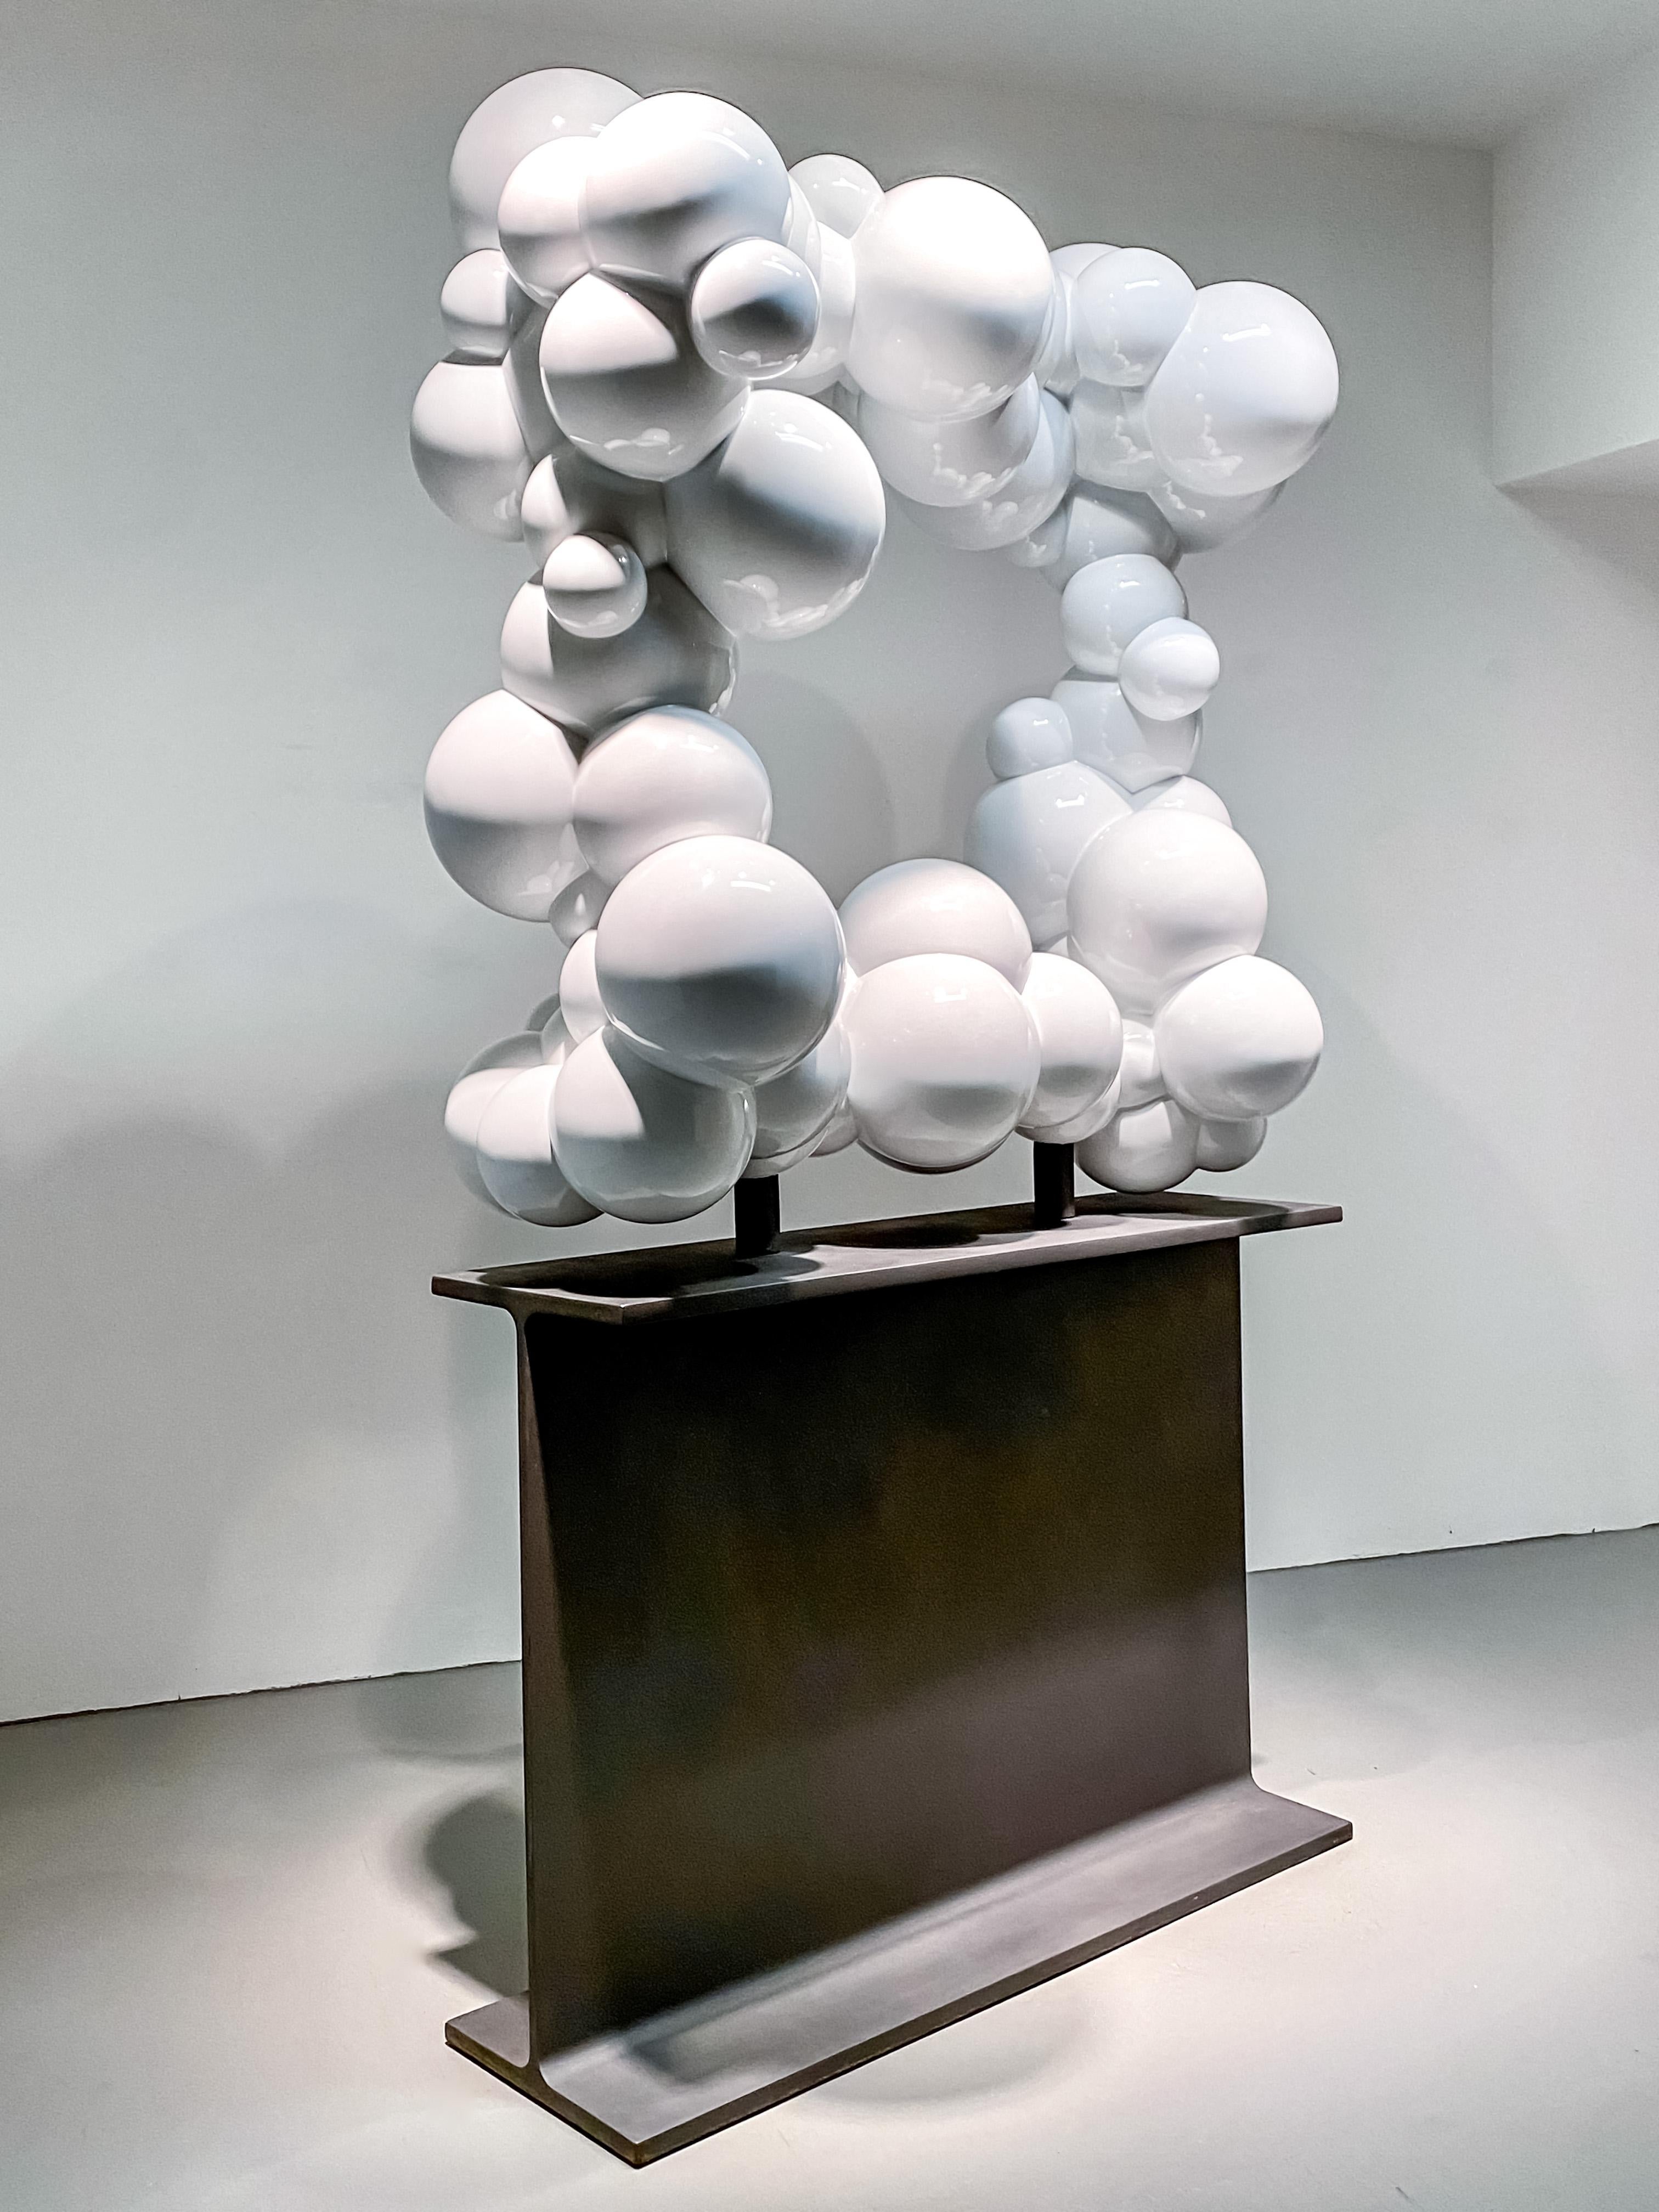 This playful pop art-inspired large indoor sculpture is by Calgary’s Alexander Caldwell. Stainless steel balls in various sizes are welded to create a square frame of ‘clouds’--each ball coated in glossy bright white. Caldwell meticulously adds